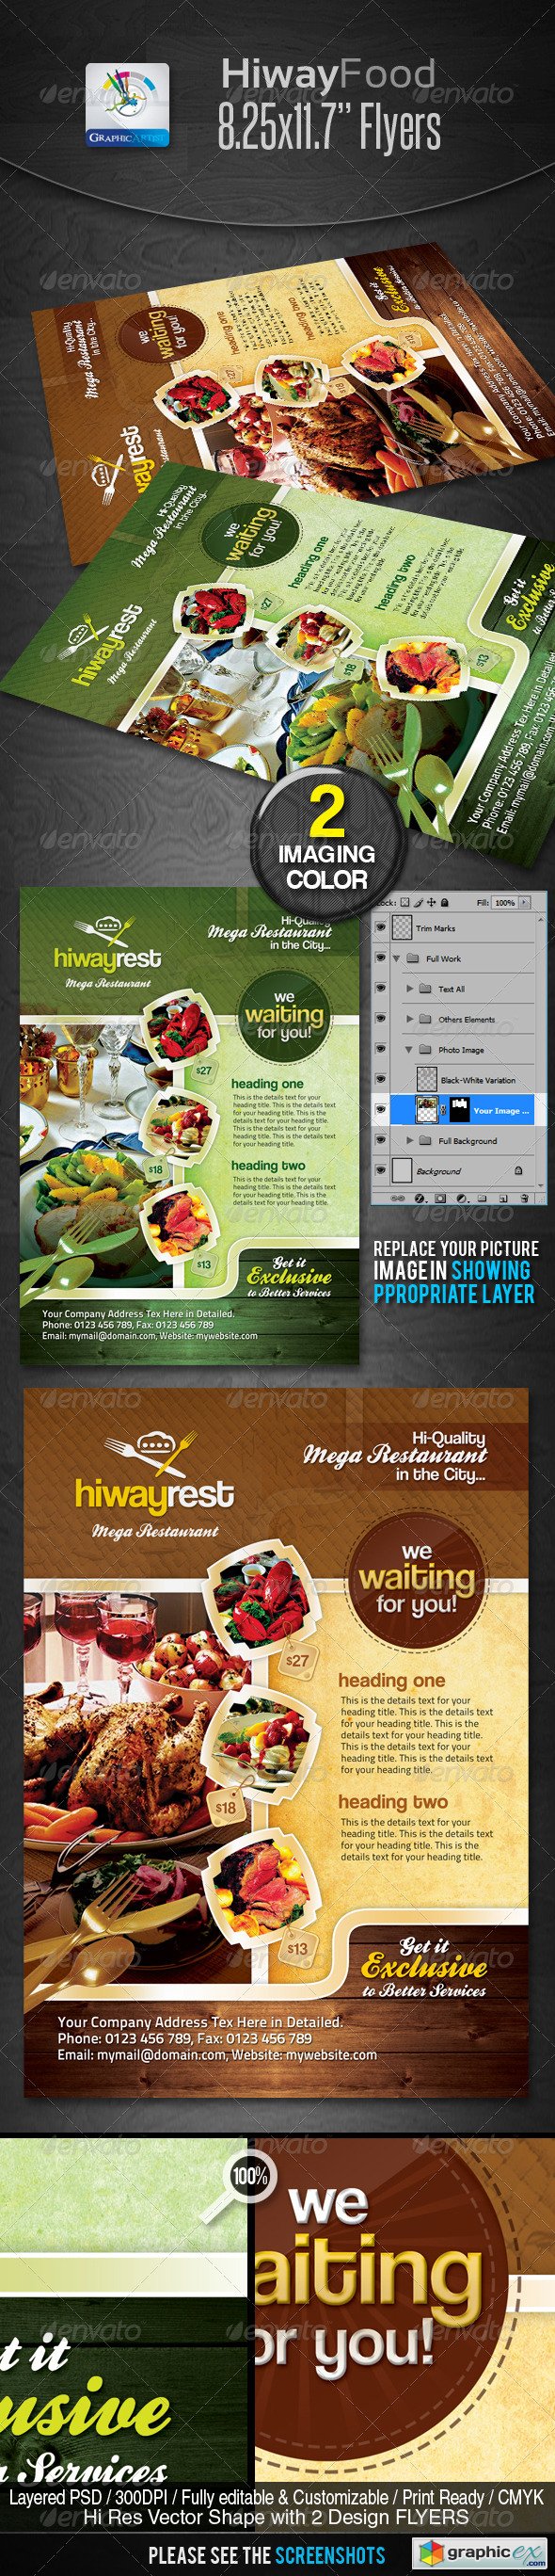 Hiway Modern Foods Flyers 2335365